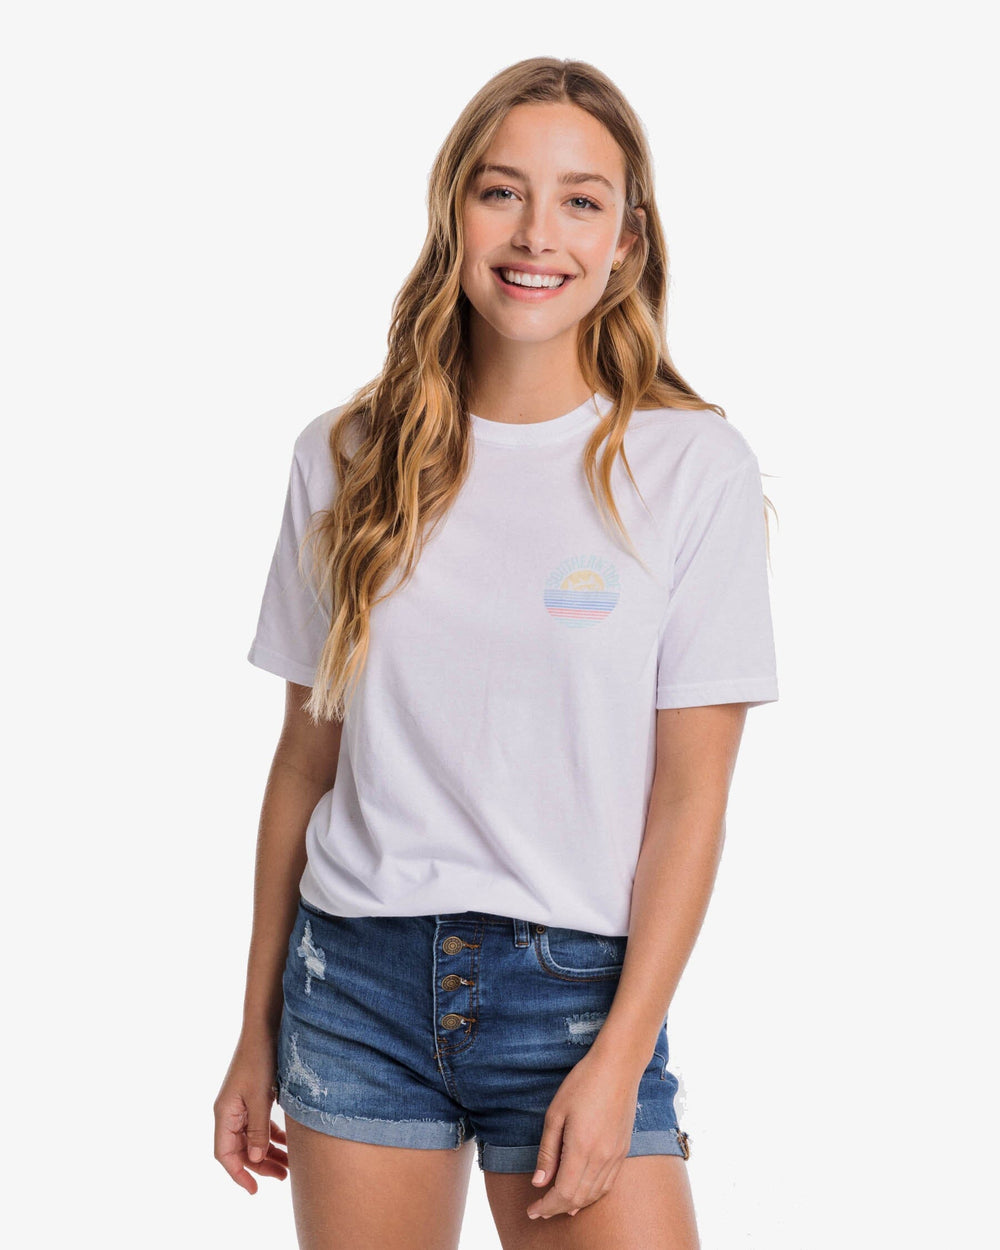 The front view of the Southern Tide Striped Sunset Circle T-Shirt by Southern Tide - Classic White